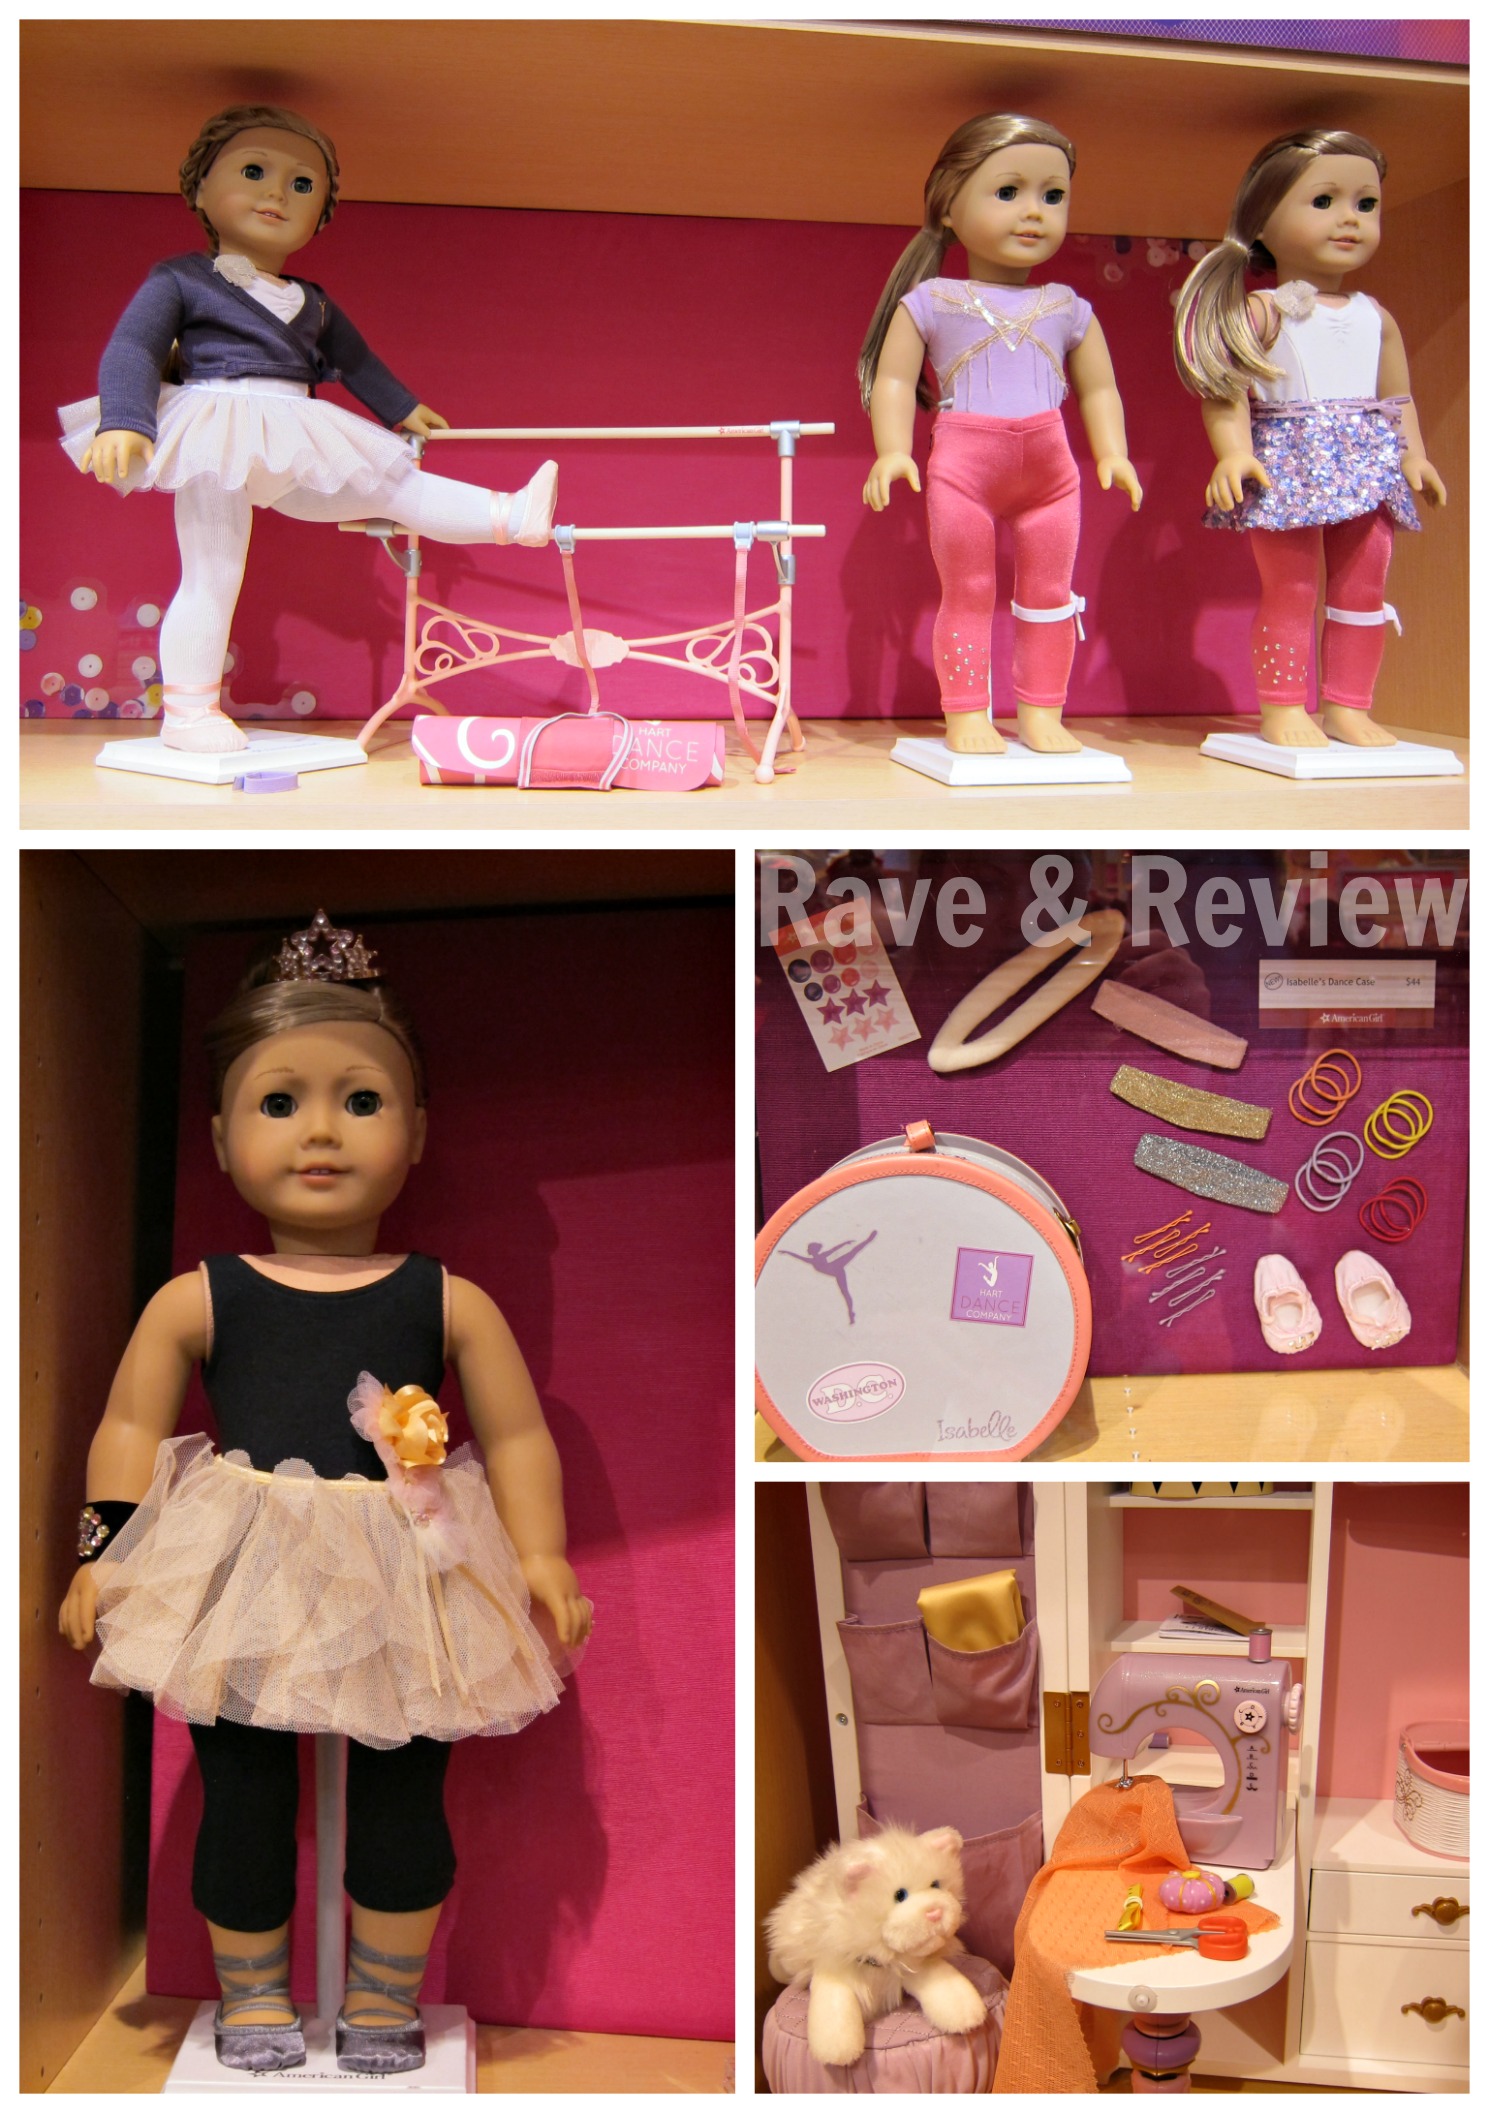 american girl doll of the year 2014